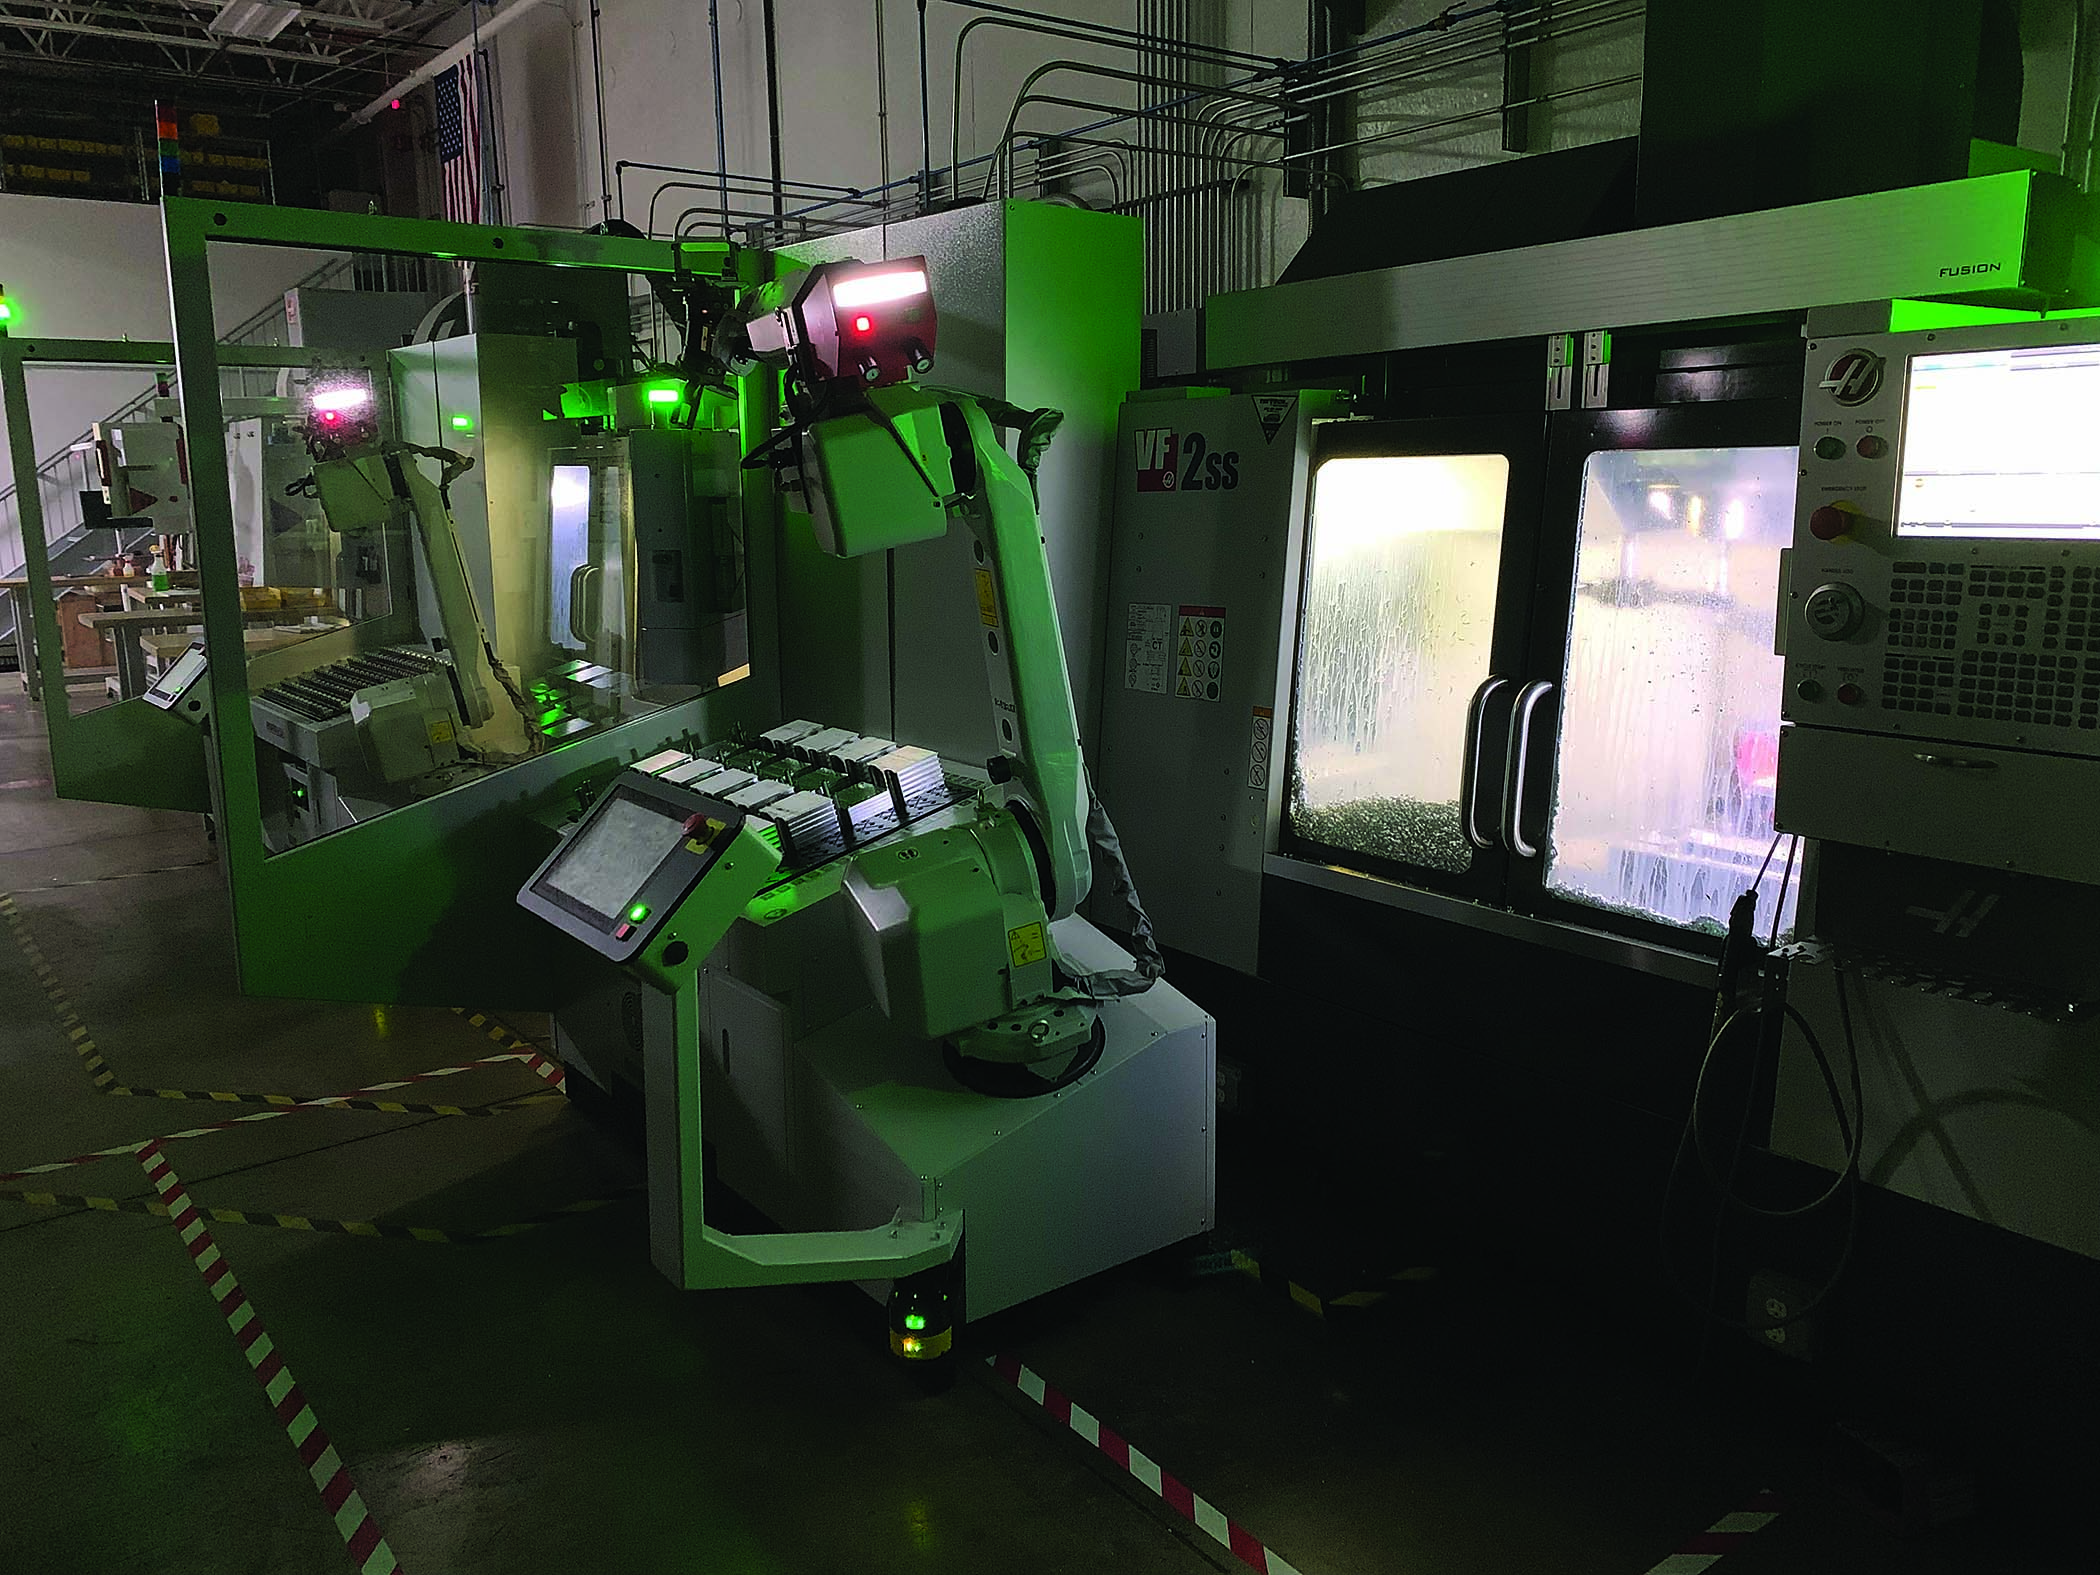 During a night shift, two Mill-Assist systems with traditional Fanuc industrial robots tend Haas VF-2SS CNC mills unattended.